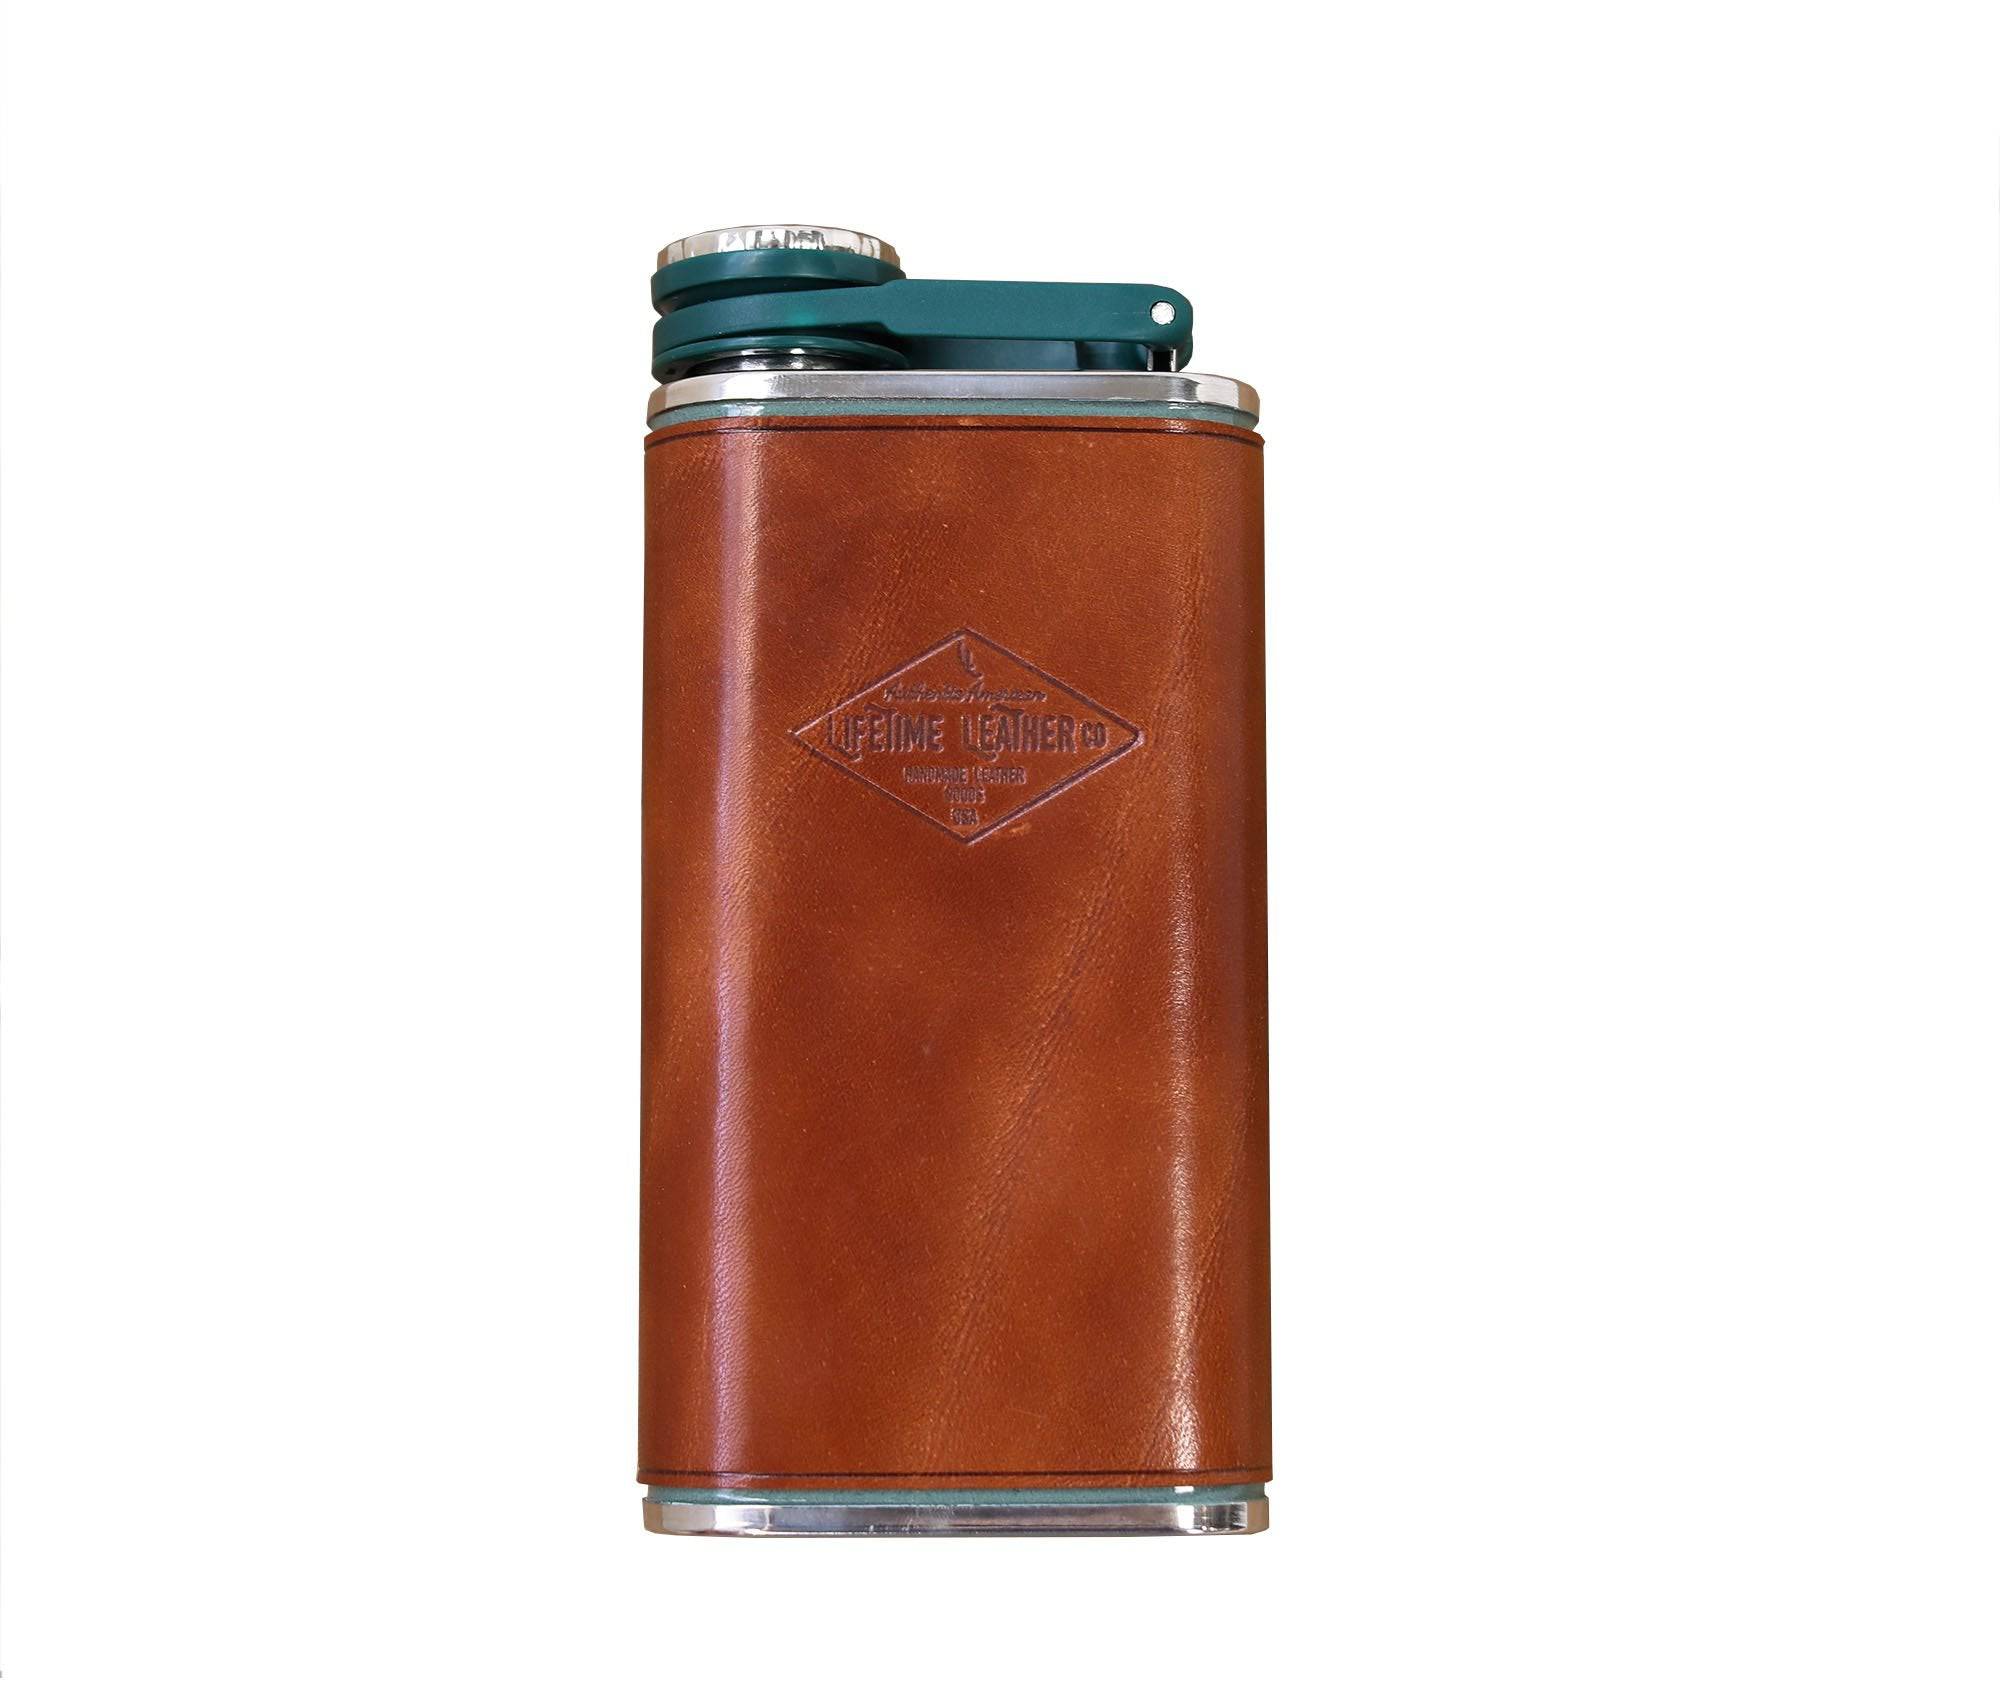  Leather Flask by Lifetime Leather Co Lifetime Leather Co Perfumarie